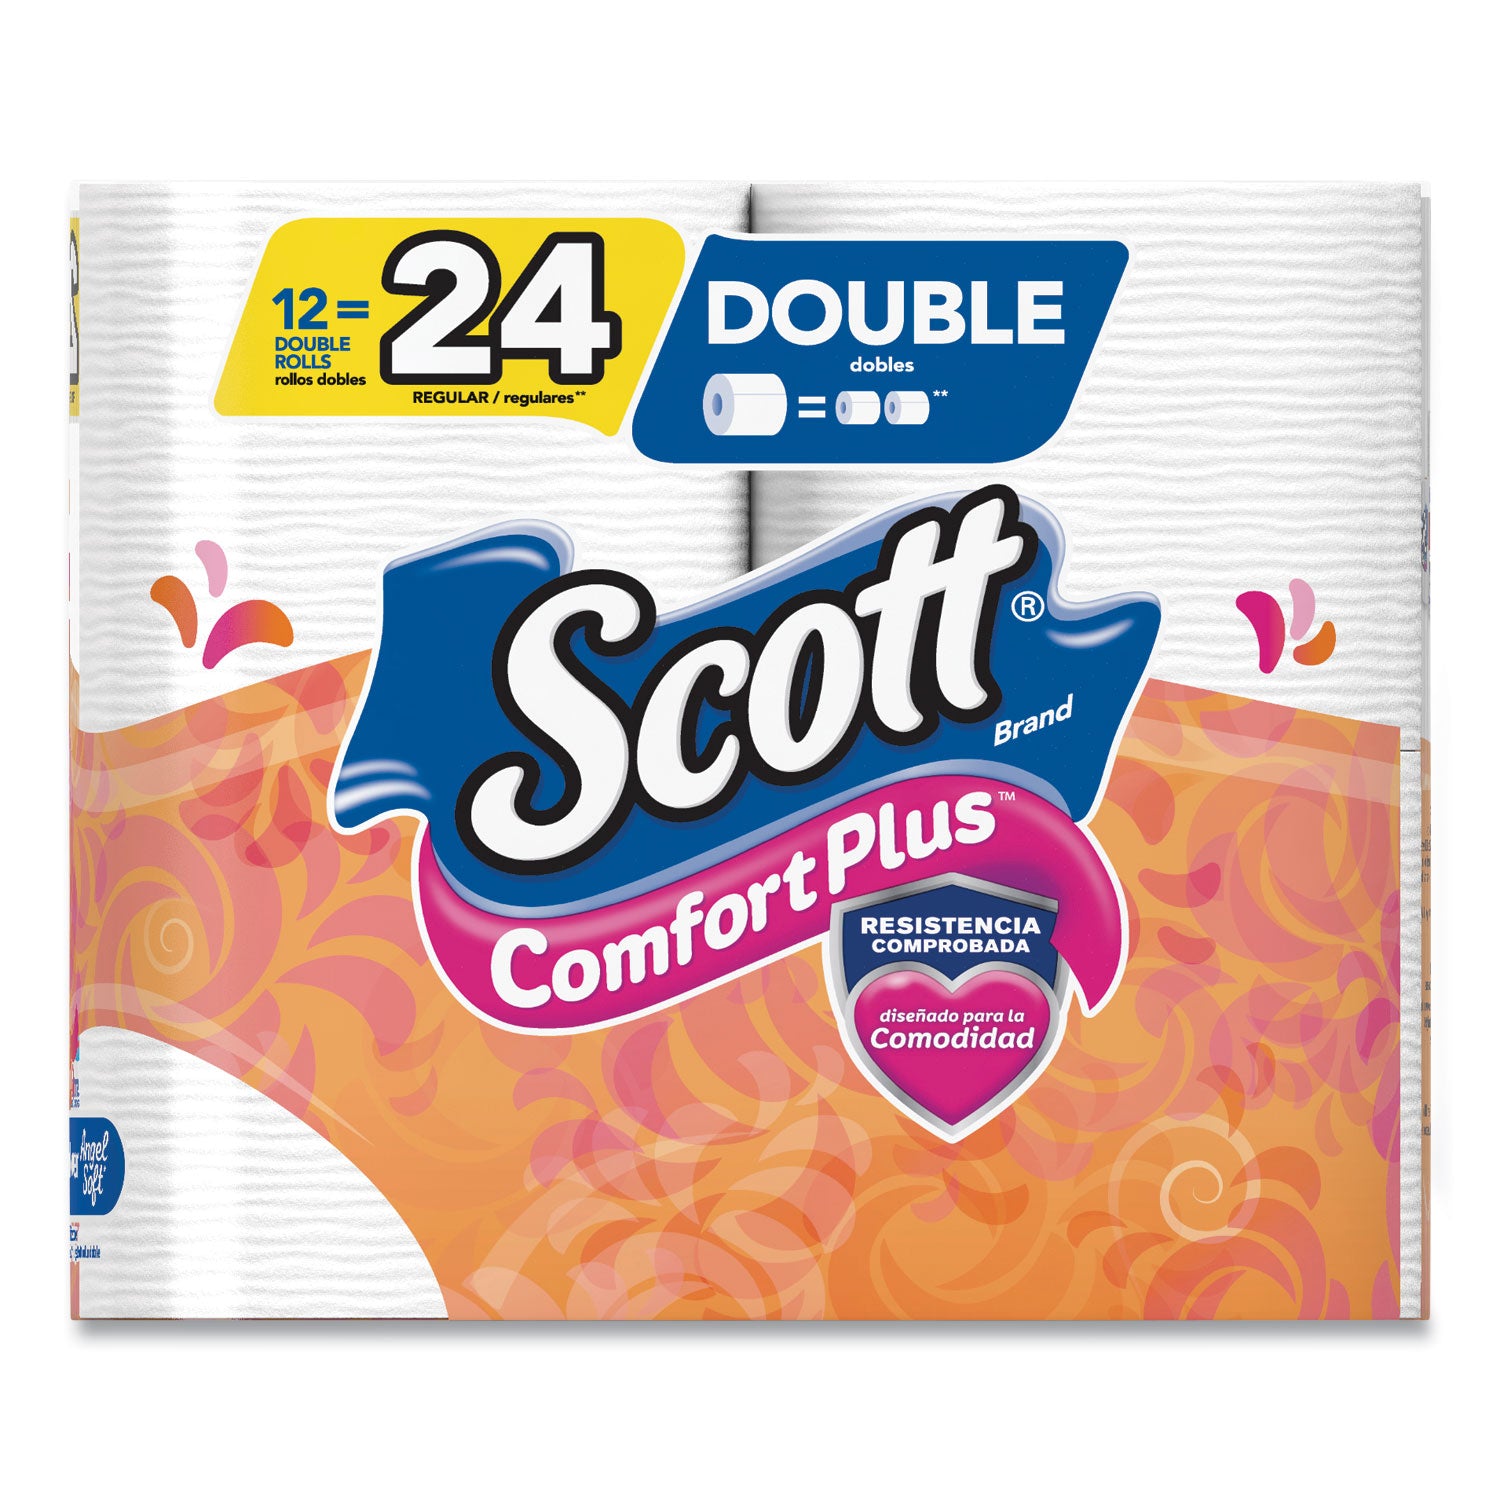 comfortplus-toilet-paper-double-roll-bath-tissue-septic-safe-1-ply-white-231-sheets-roll-12-rolls-pack-4-packs-carton_kcc47618 - 7